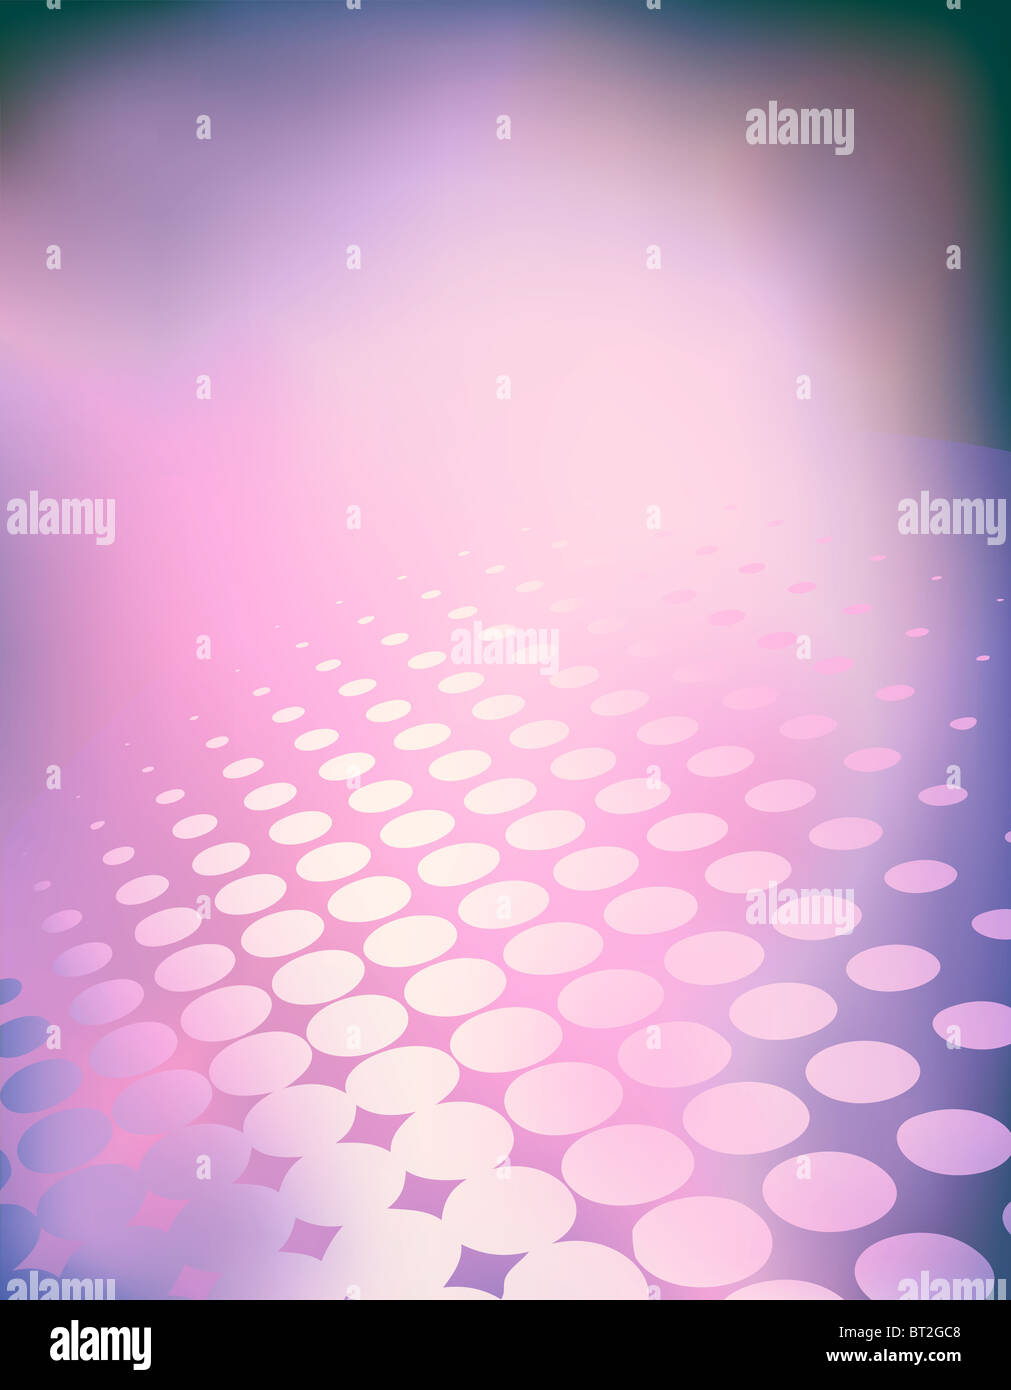 Abstract background of light dots and color gradients Stock Photo